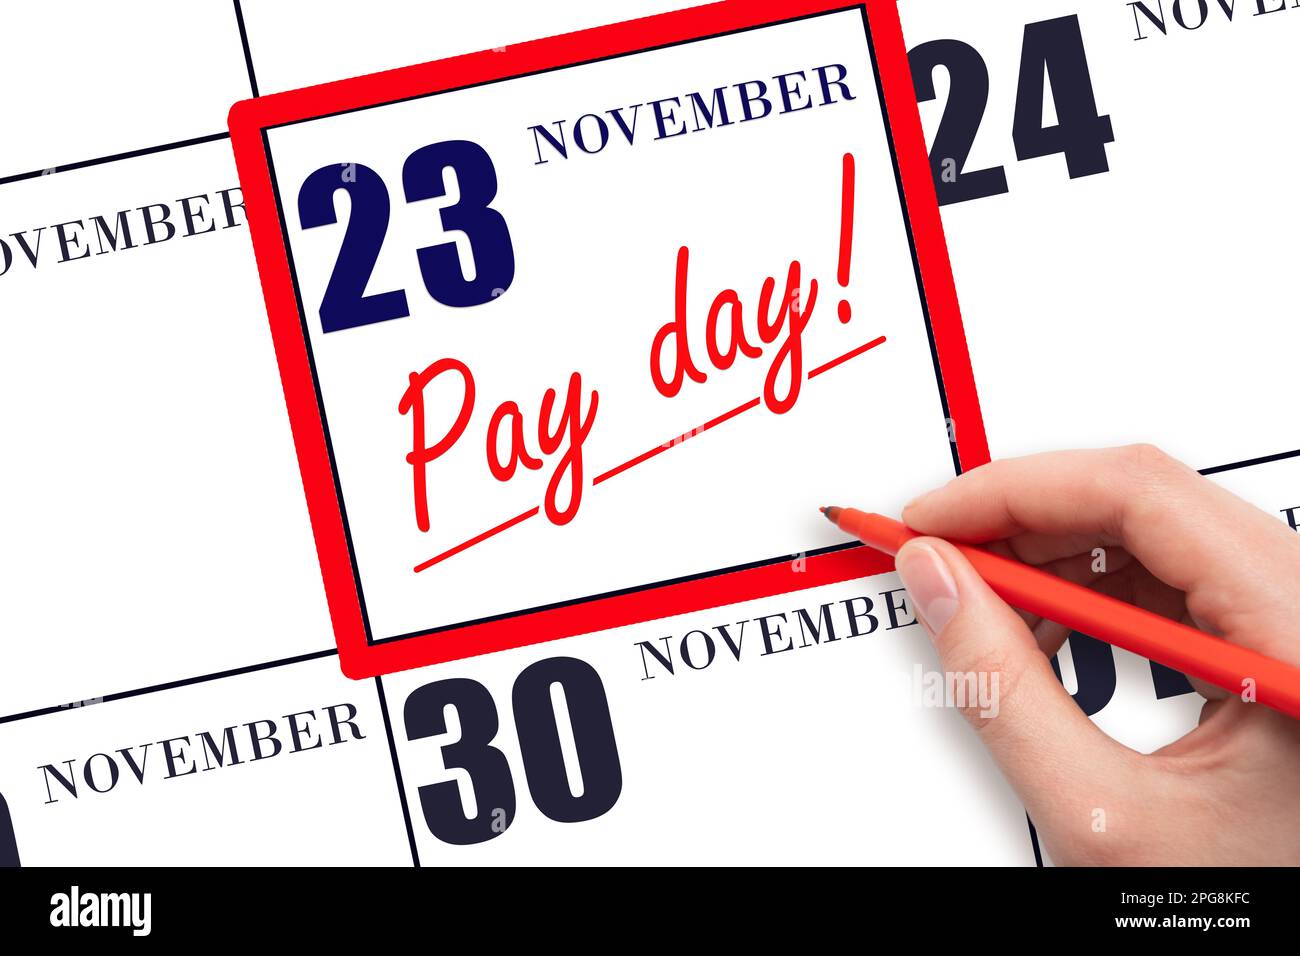 23rd day of November. Hand writing text PAY DATE on calendar date November 23 and underline it. Payment due date. Reminder concept of payment. Autumn Stock Photo